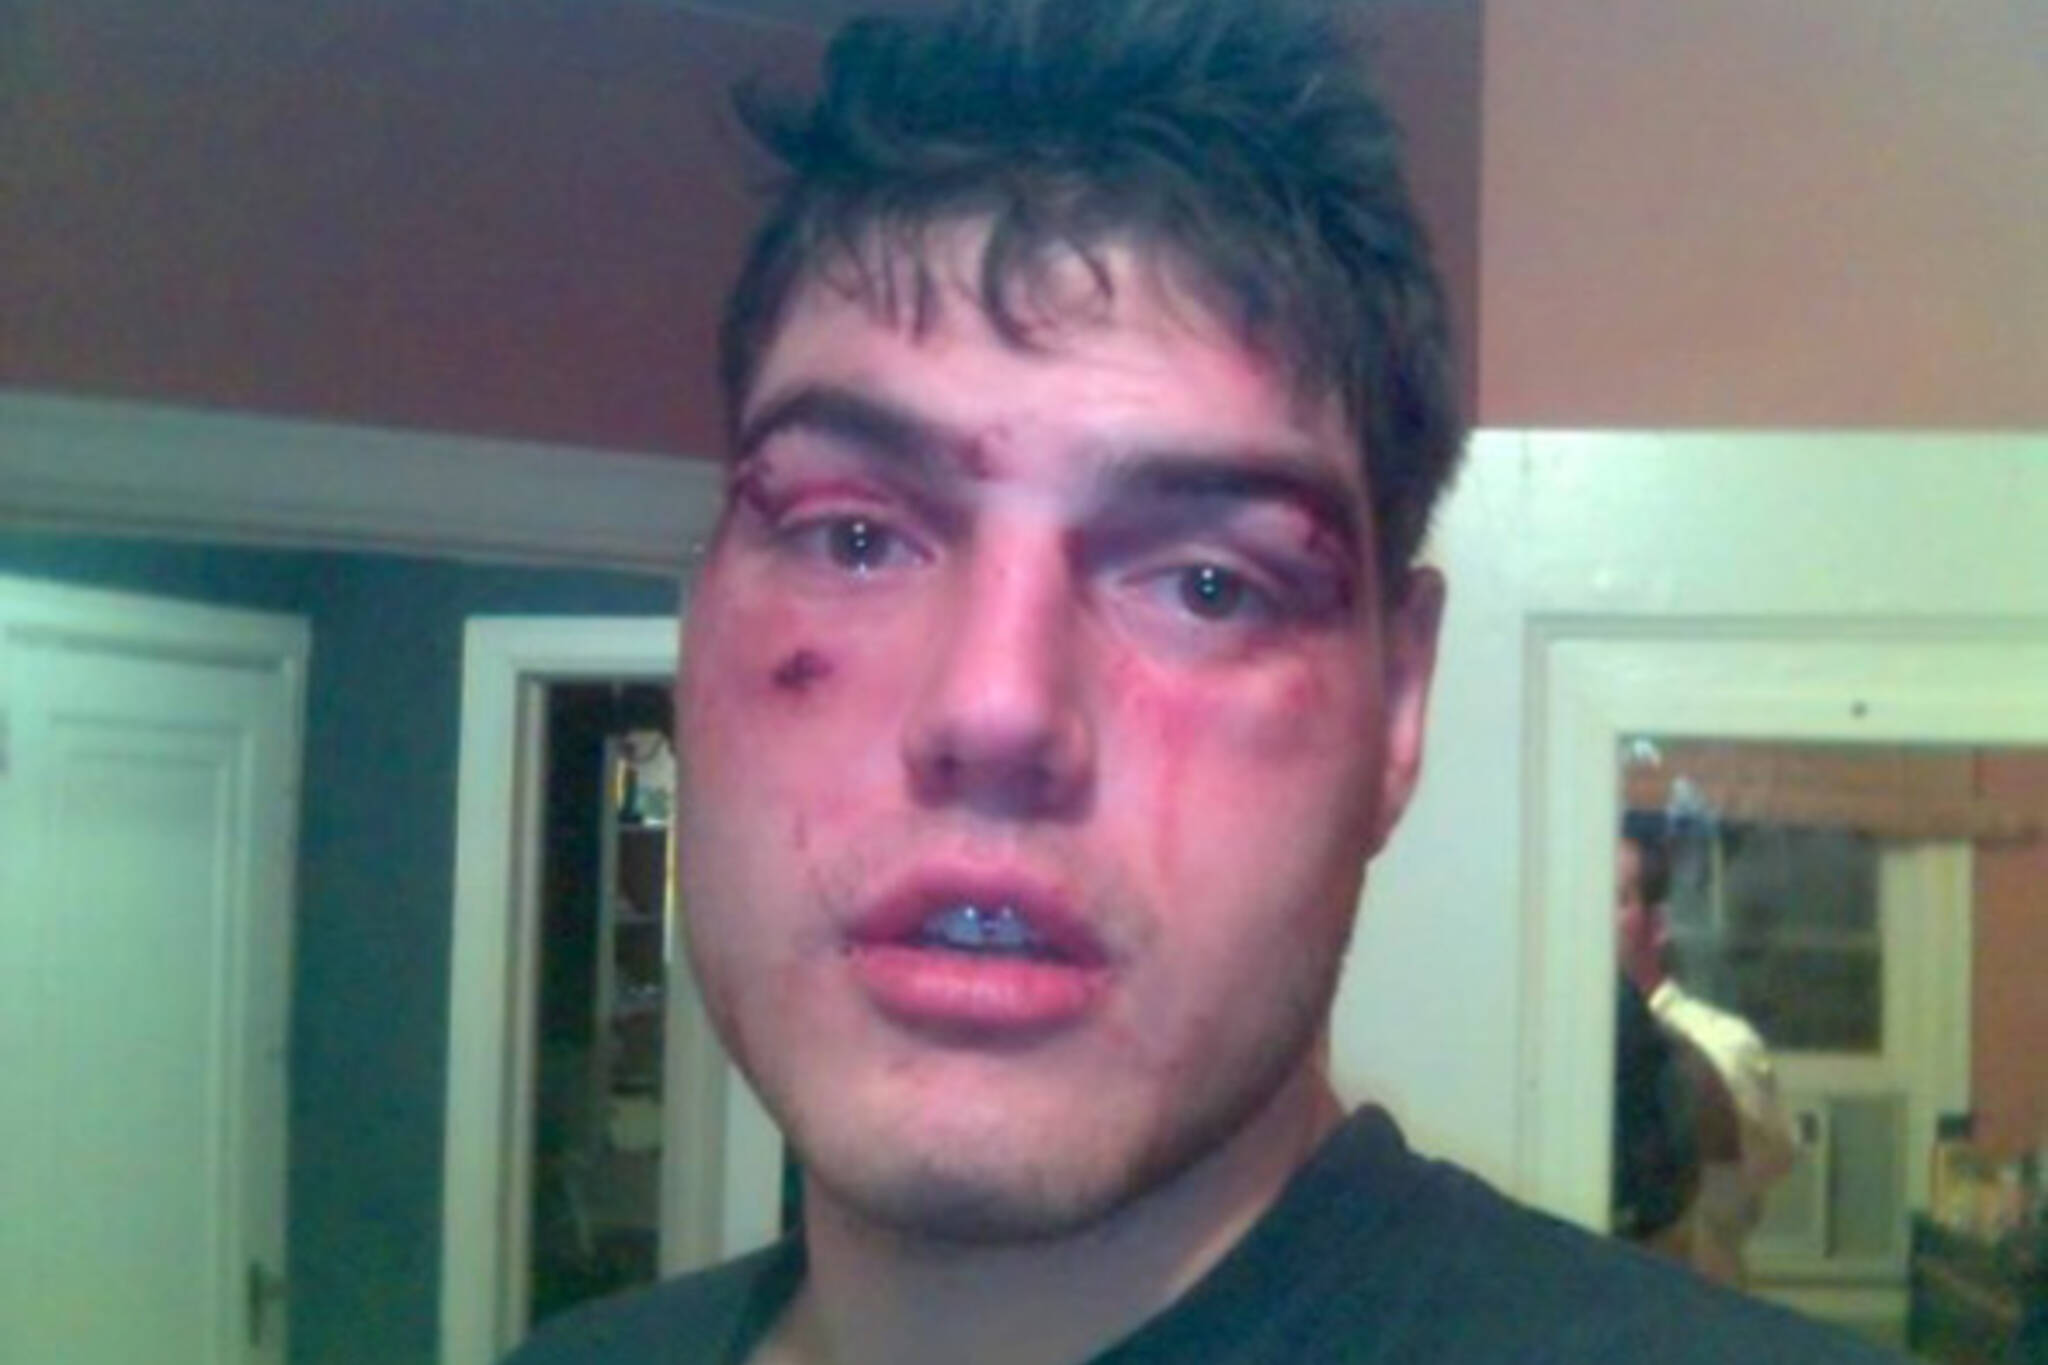 Toronto nightclub bouncers allegedly beat up Barry Ward